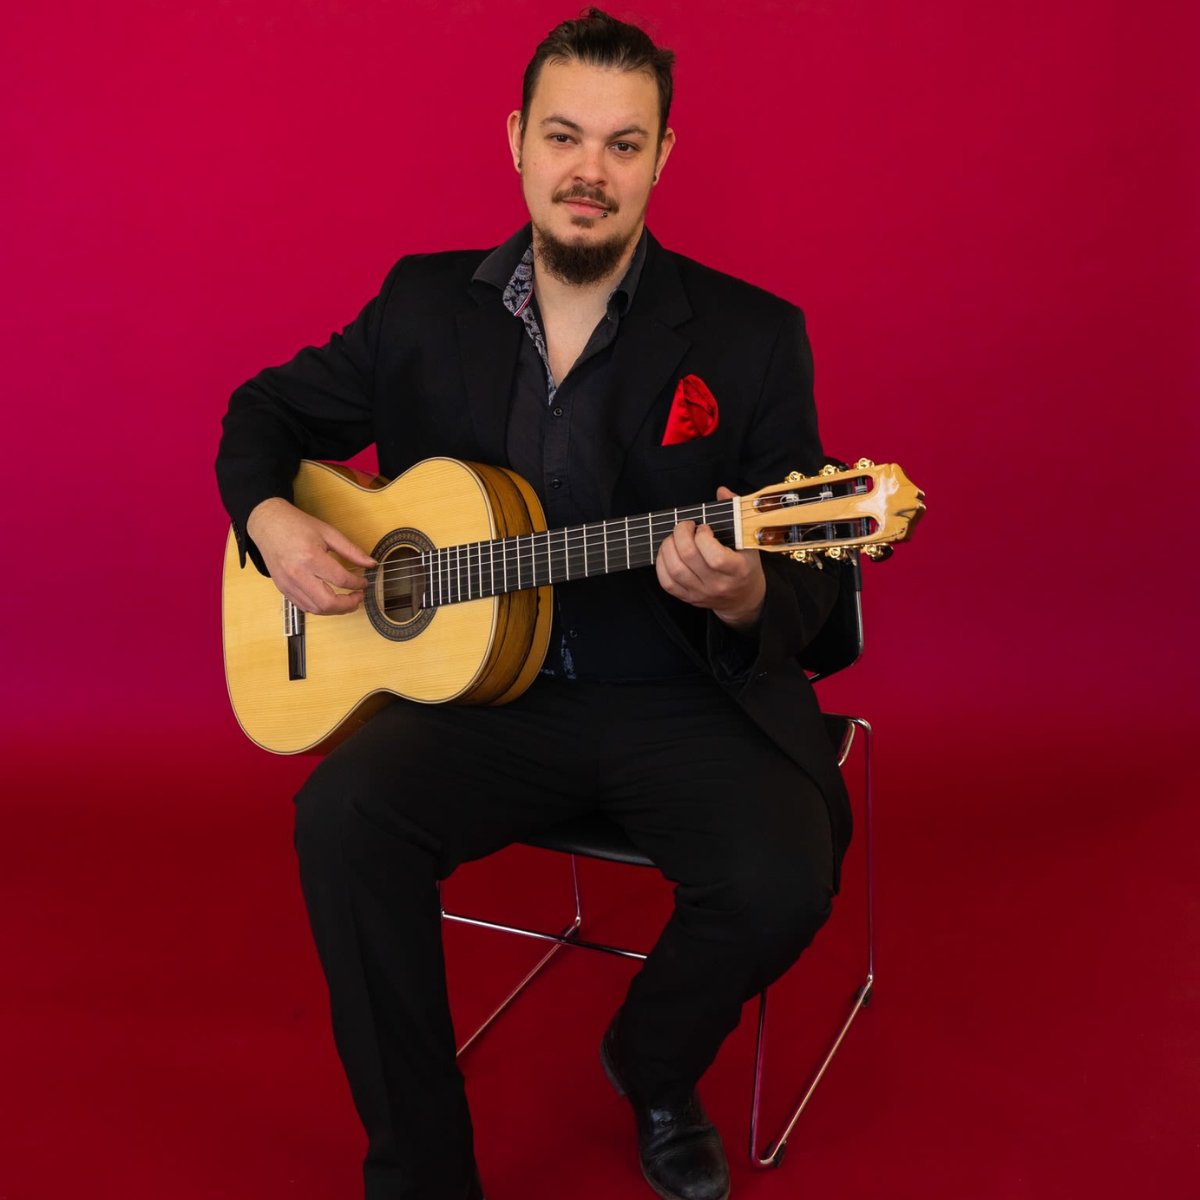 Come out to Giuffre Family Library on September 3 from 3 – 4 pm and watch an outdoor live performance by guitarist Tony Zazula: bit.ly/3svrunX #yycmusic #yycconcerts